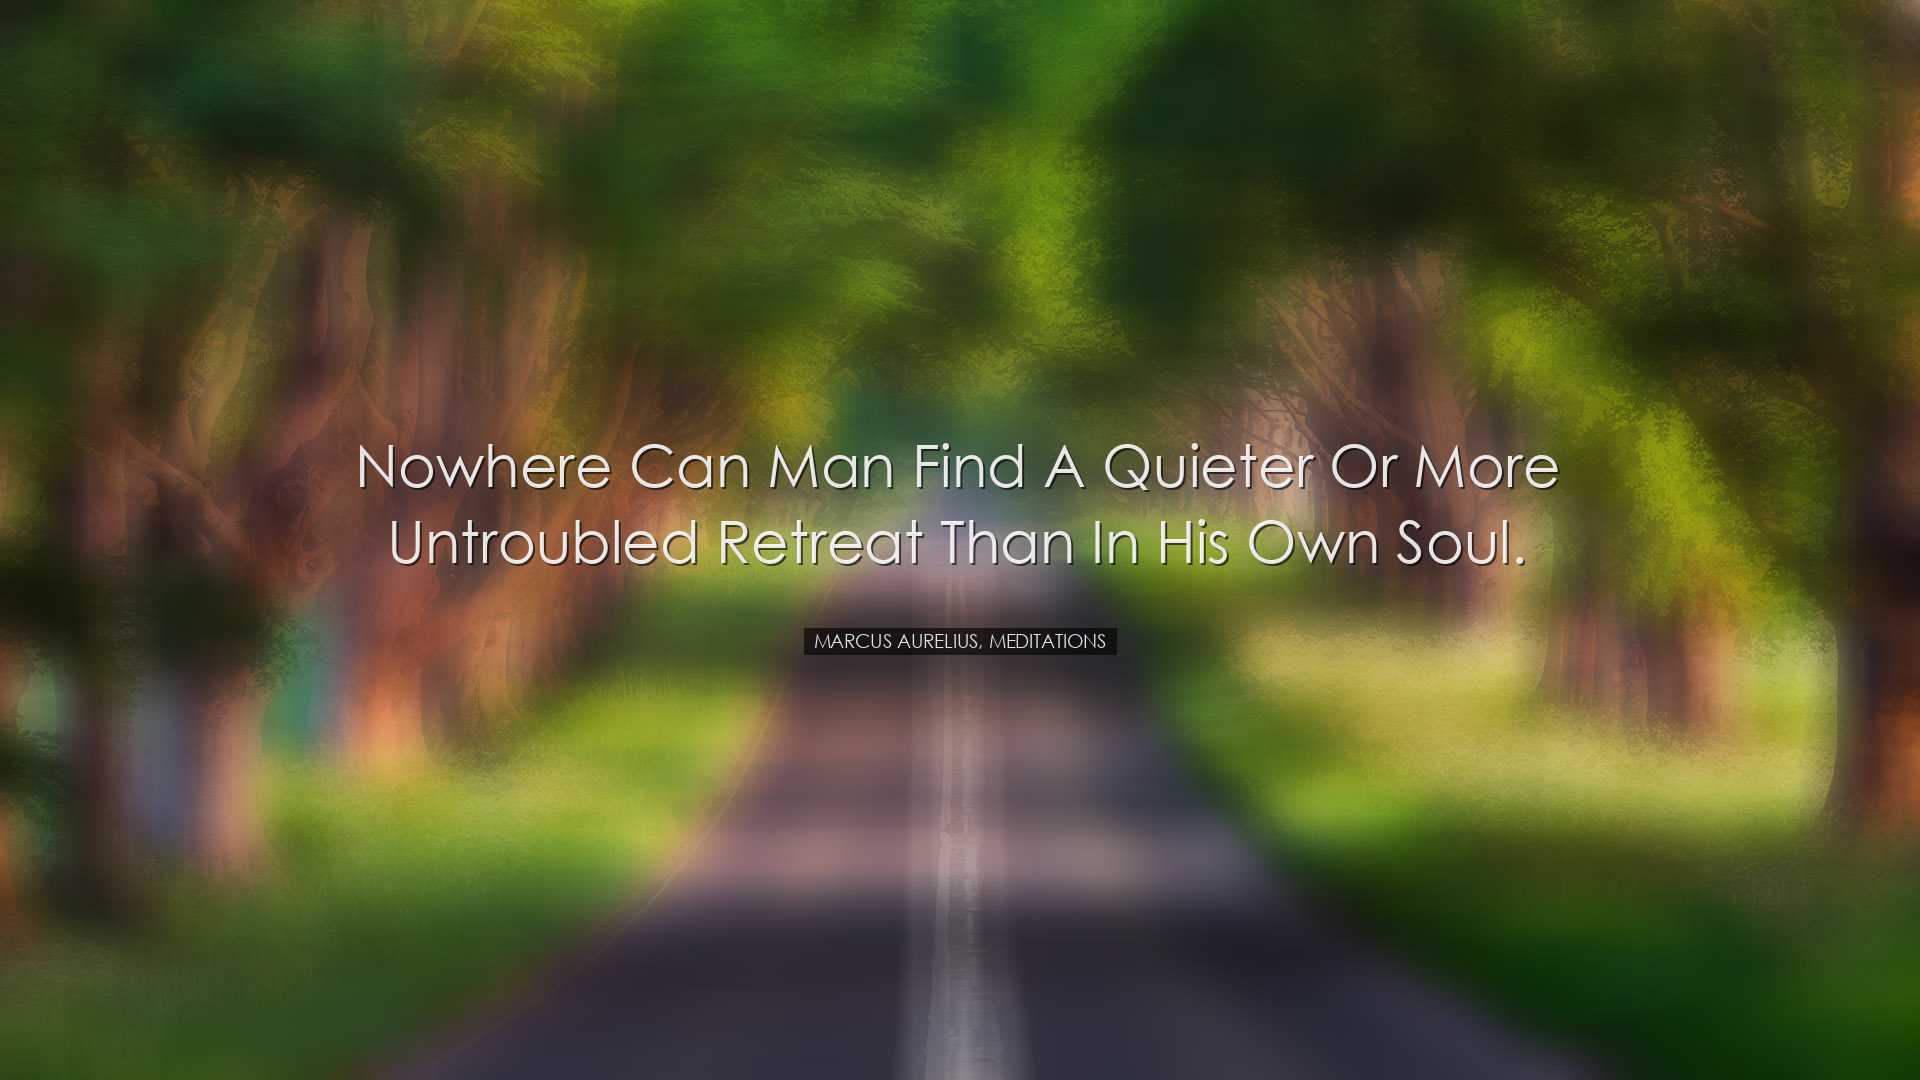 Nowhere can man find a quieter or more untroubled retreat than in